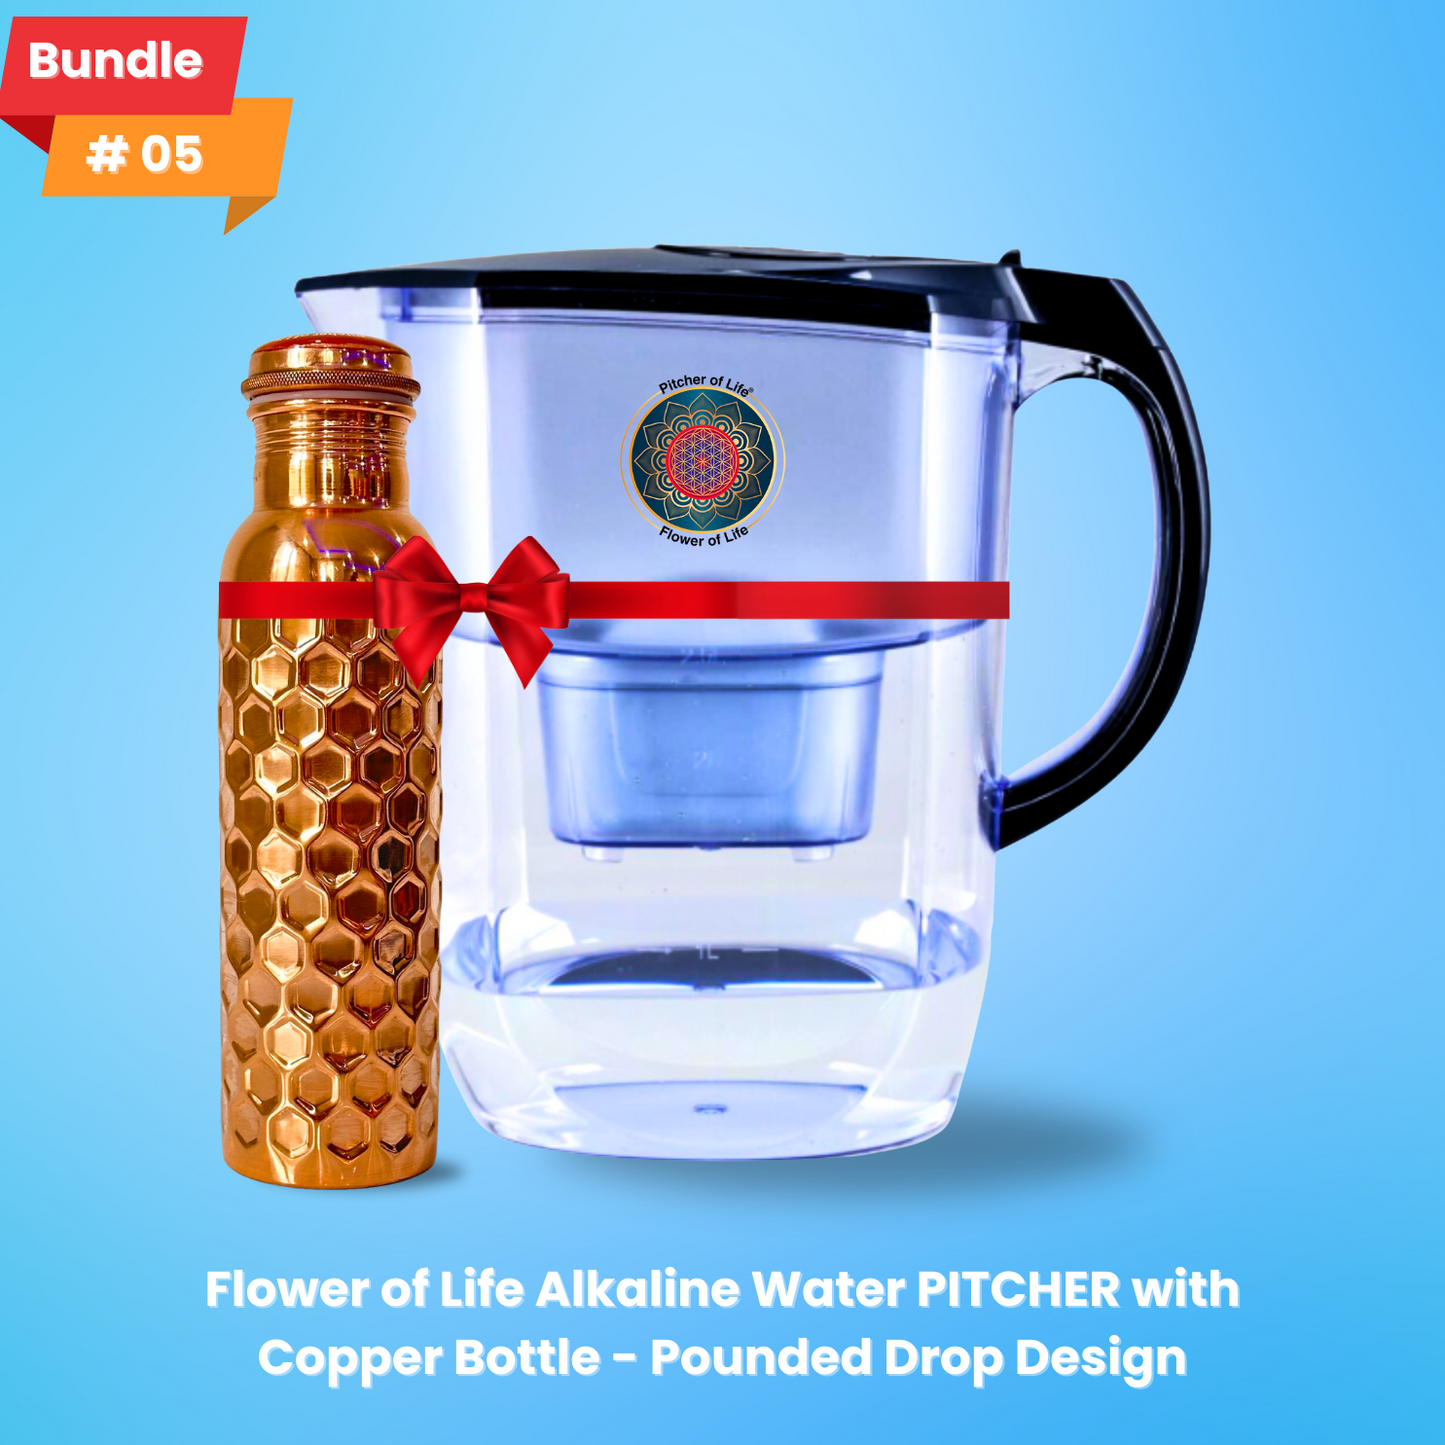 Flower of Life Alkaline Water PITCHER with Copper Bottle